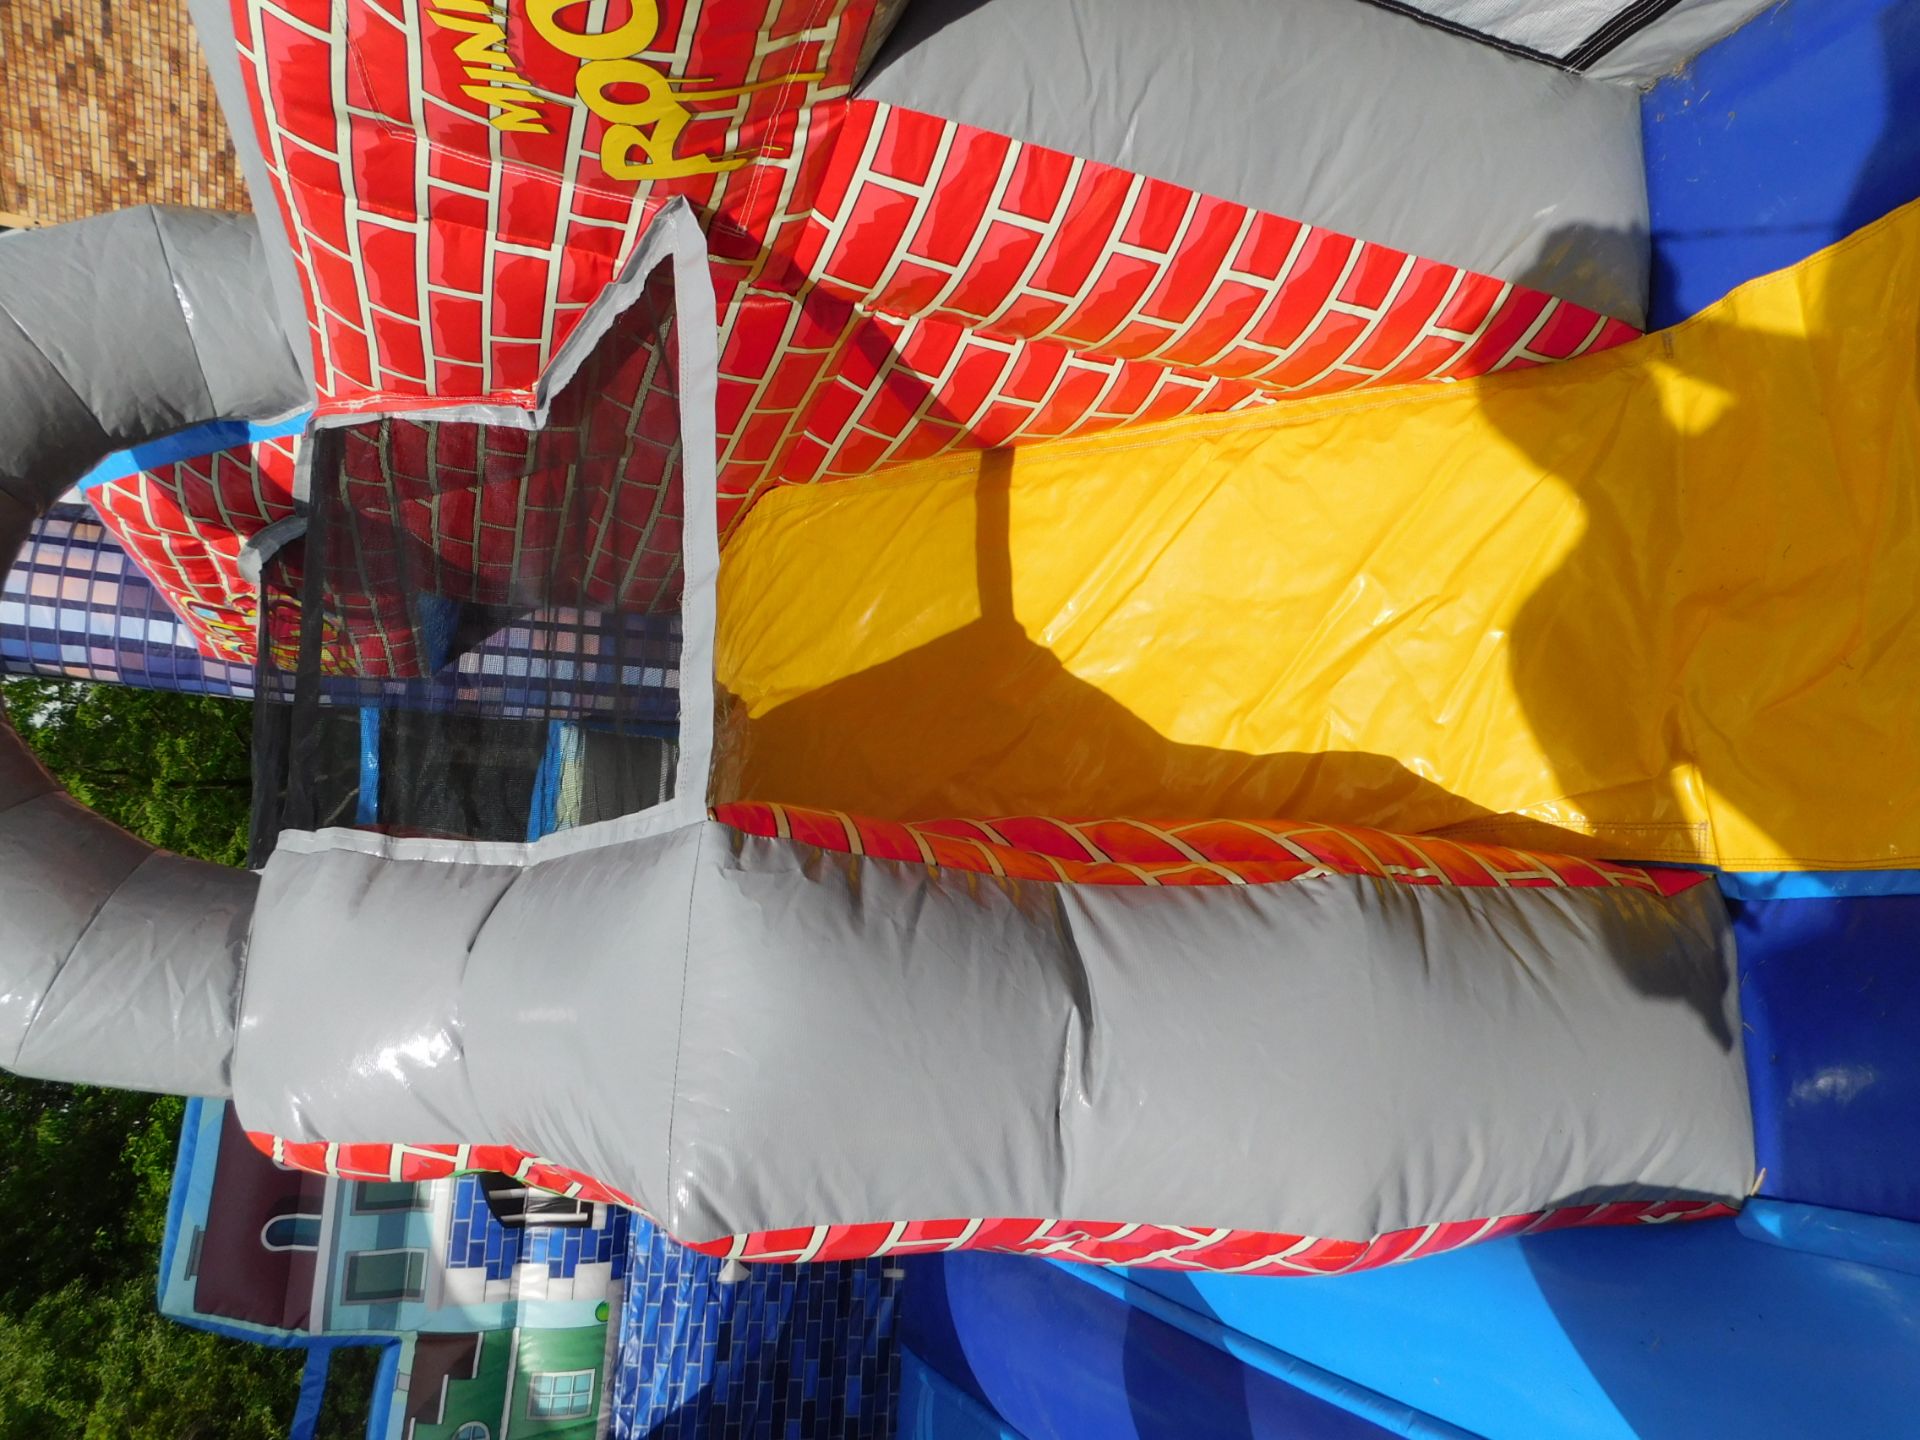 Eye Candy Mini City Inflatable Bounce House, 19'WX17'LX14'H, 2 Blowers req. - Image 18 of 22